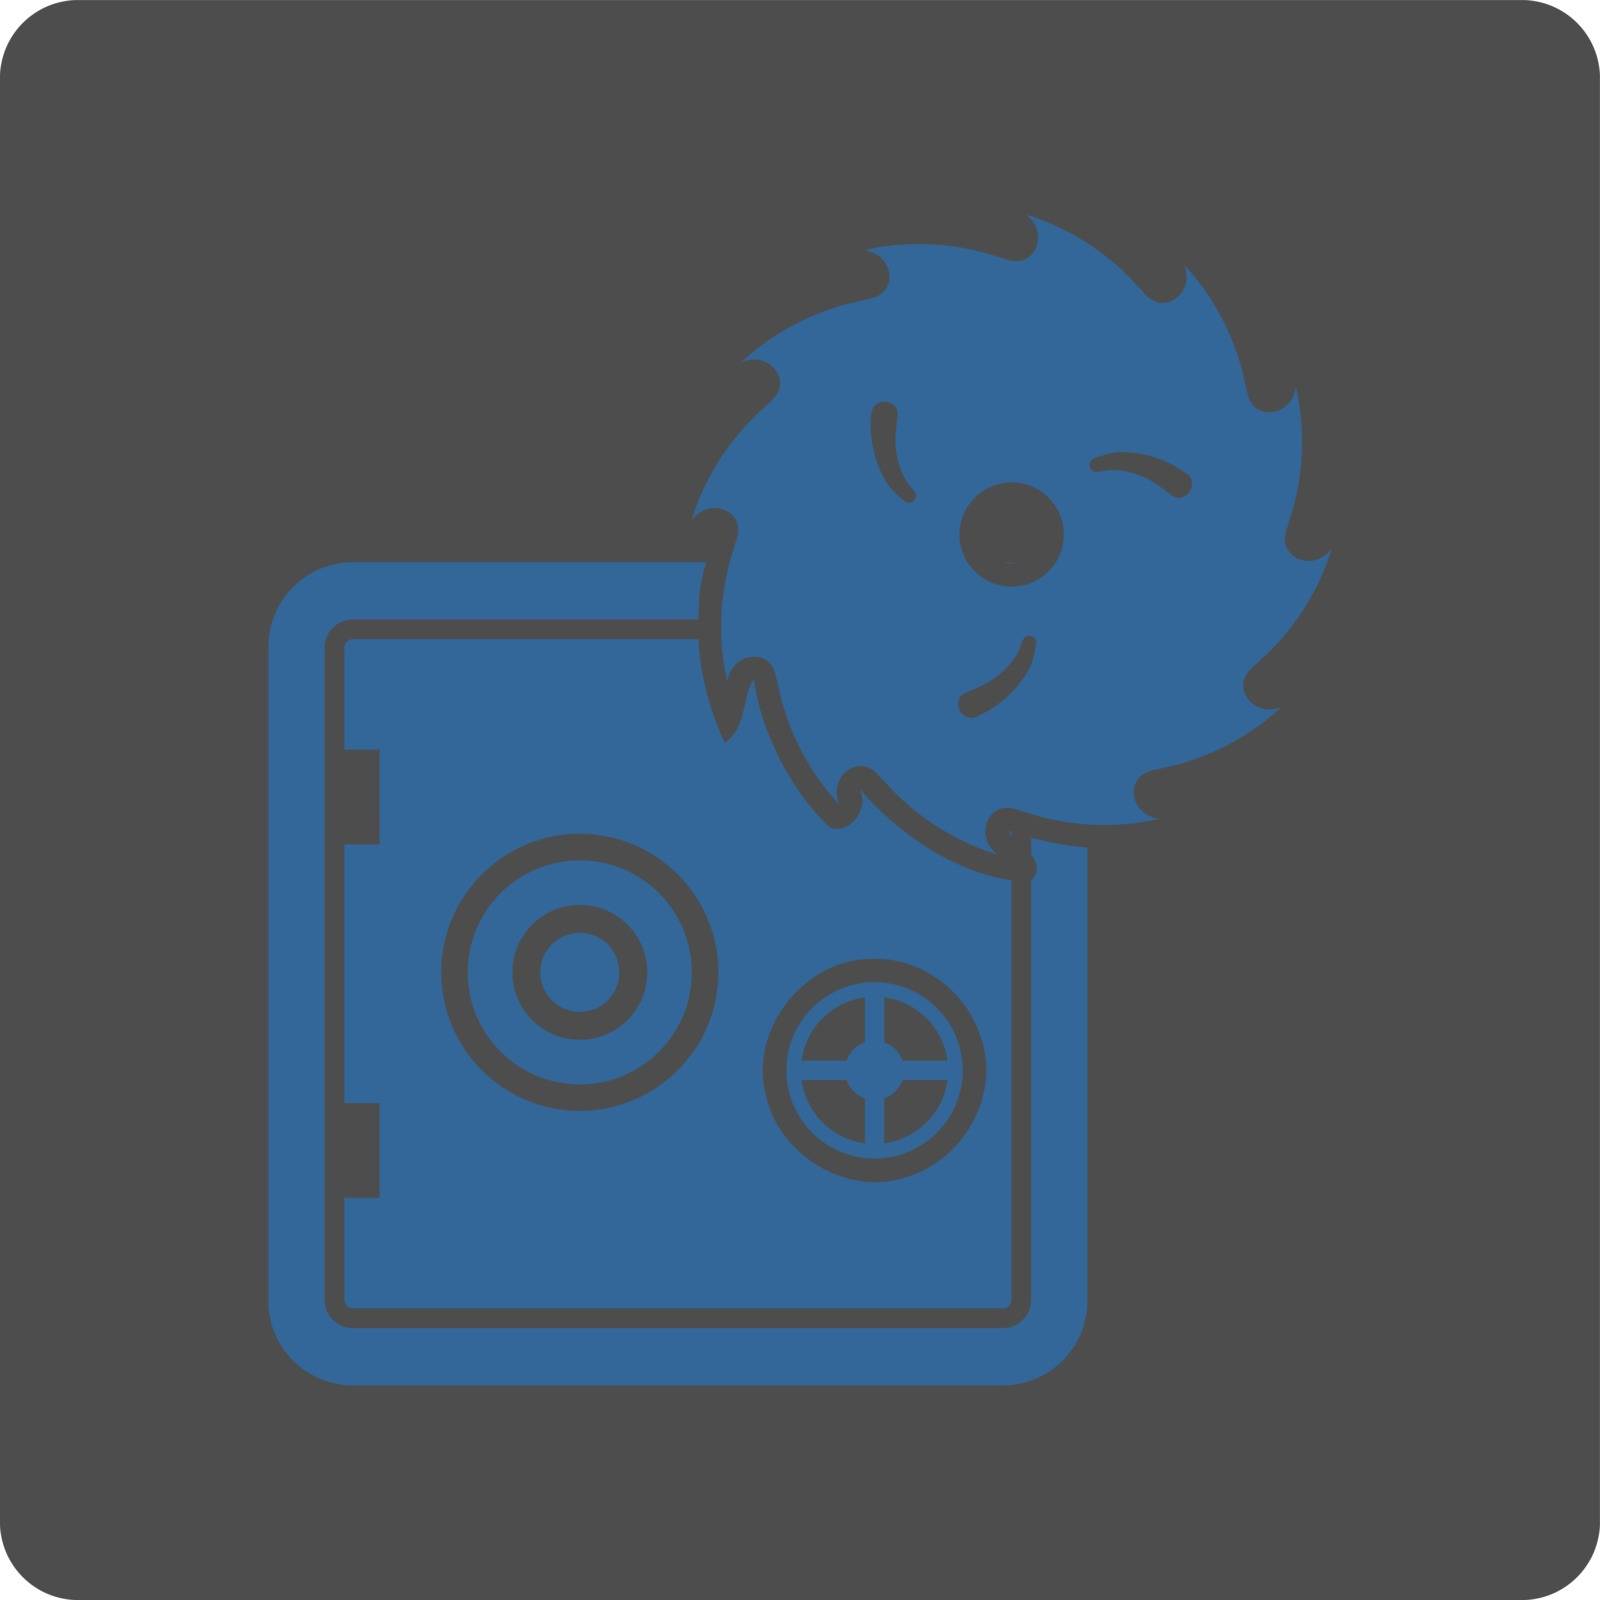 Hacking theft icon. Vector style is cobalt and gray colors, flat rounded square button on a white background.